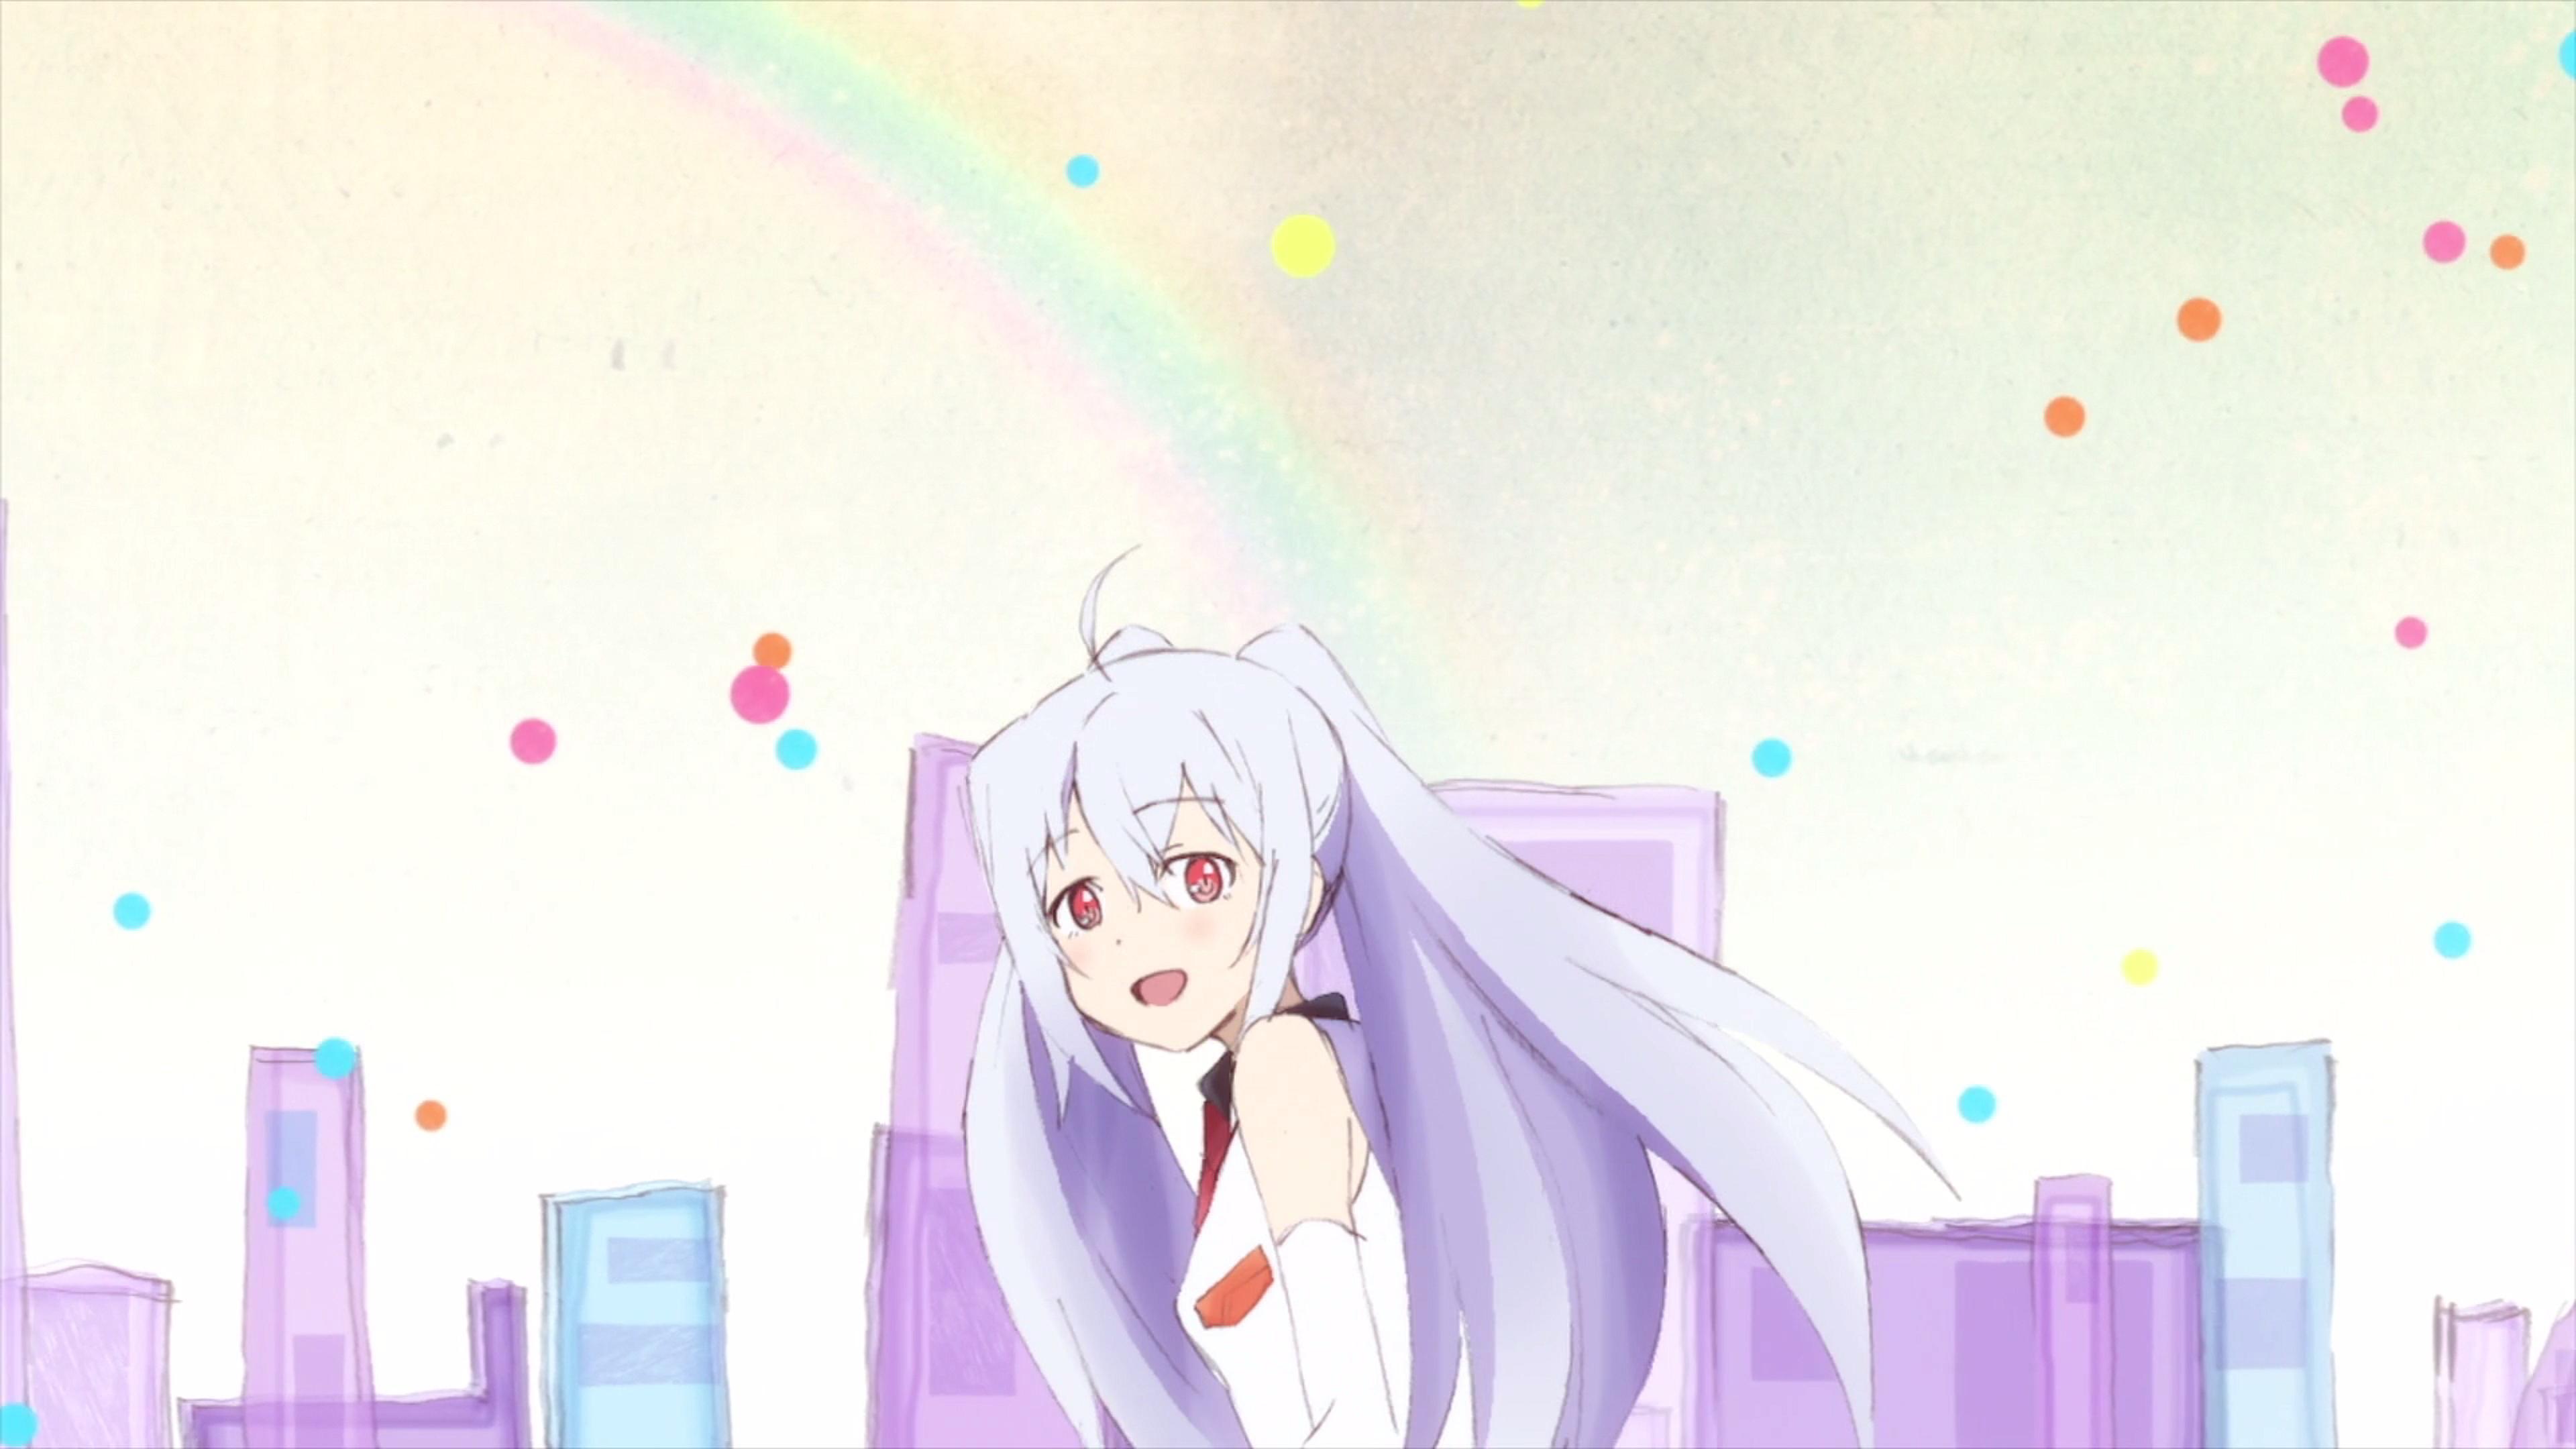 Enhanced Image of Isla from the [Plastic Memories] Ending